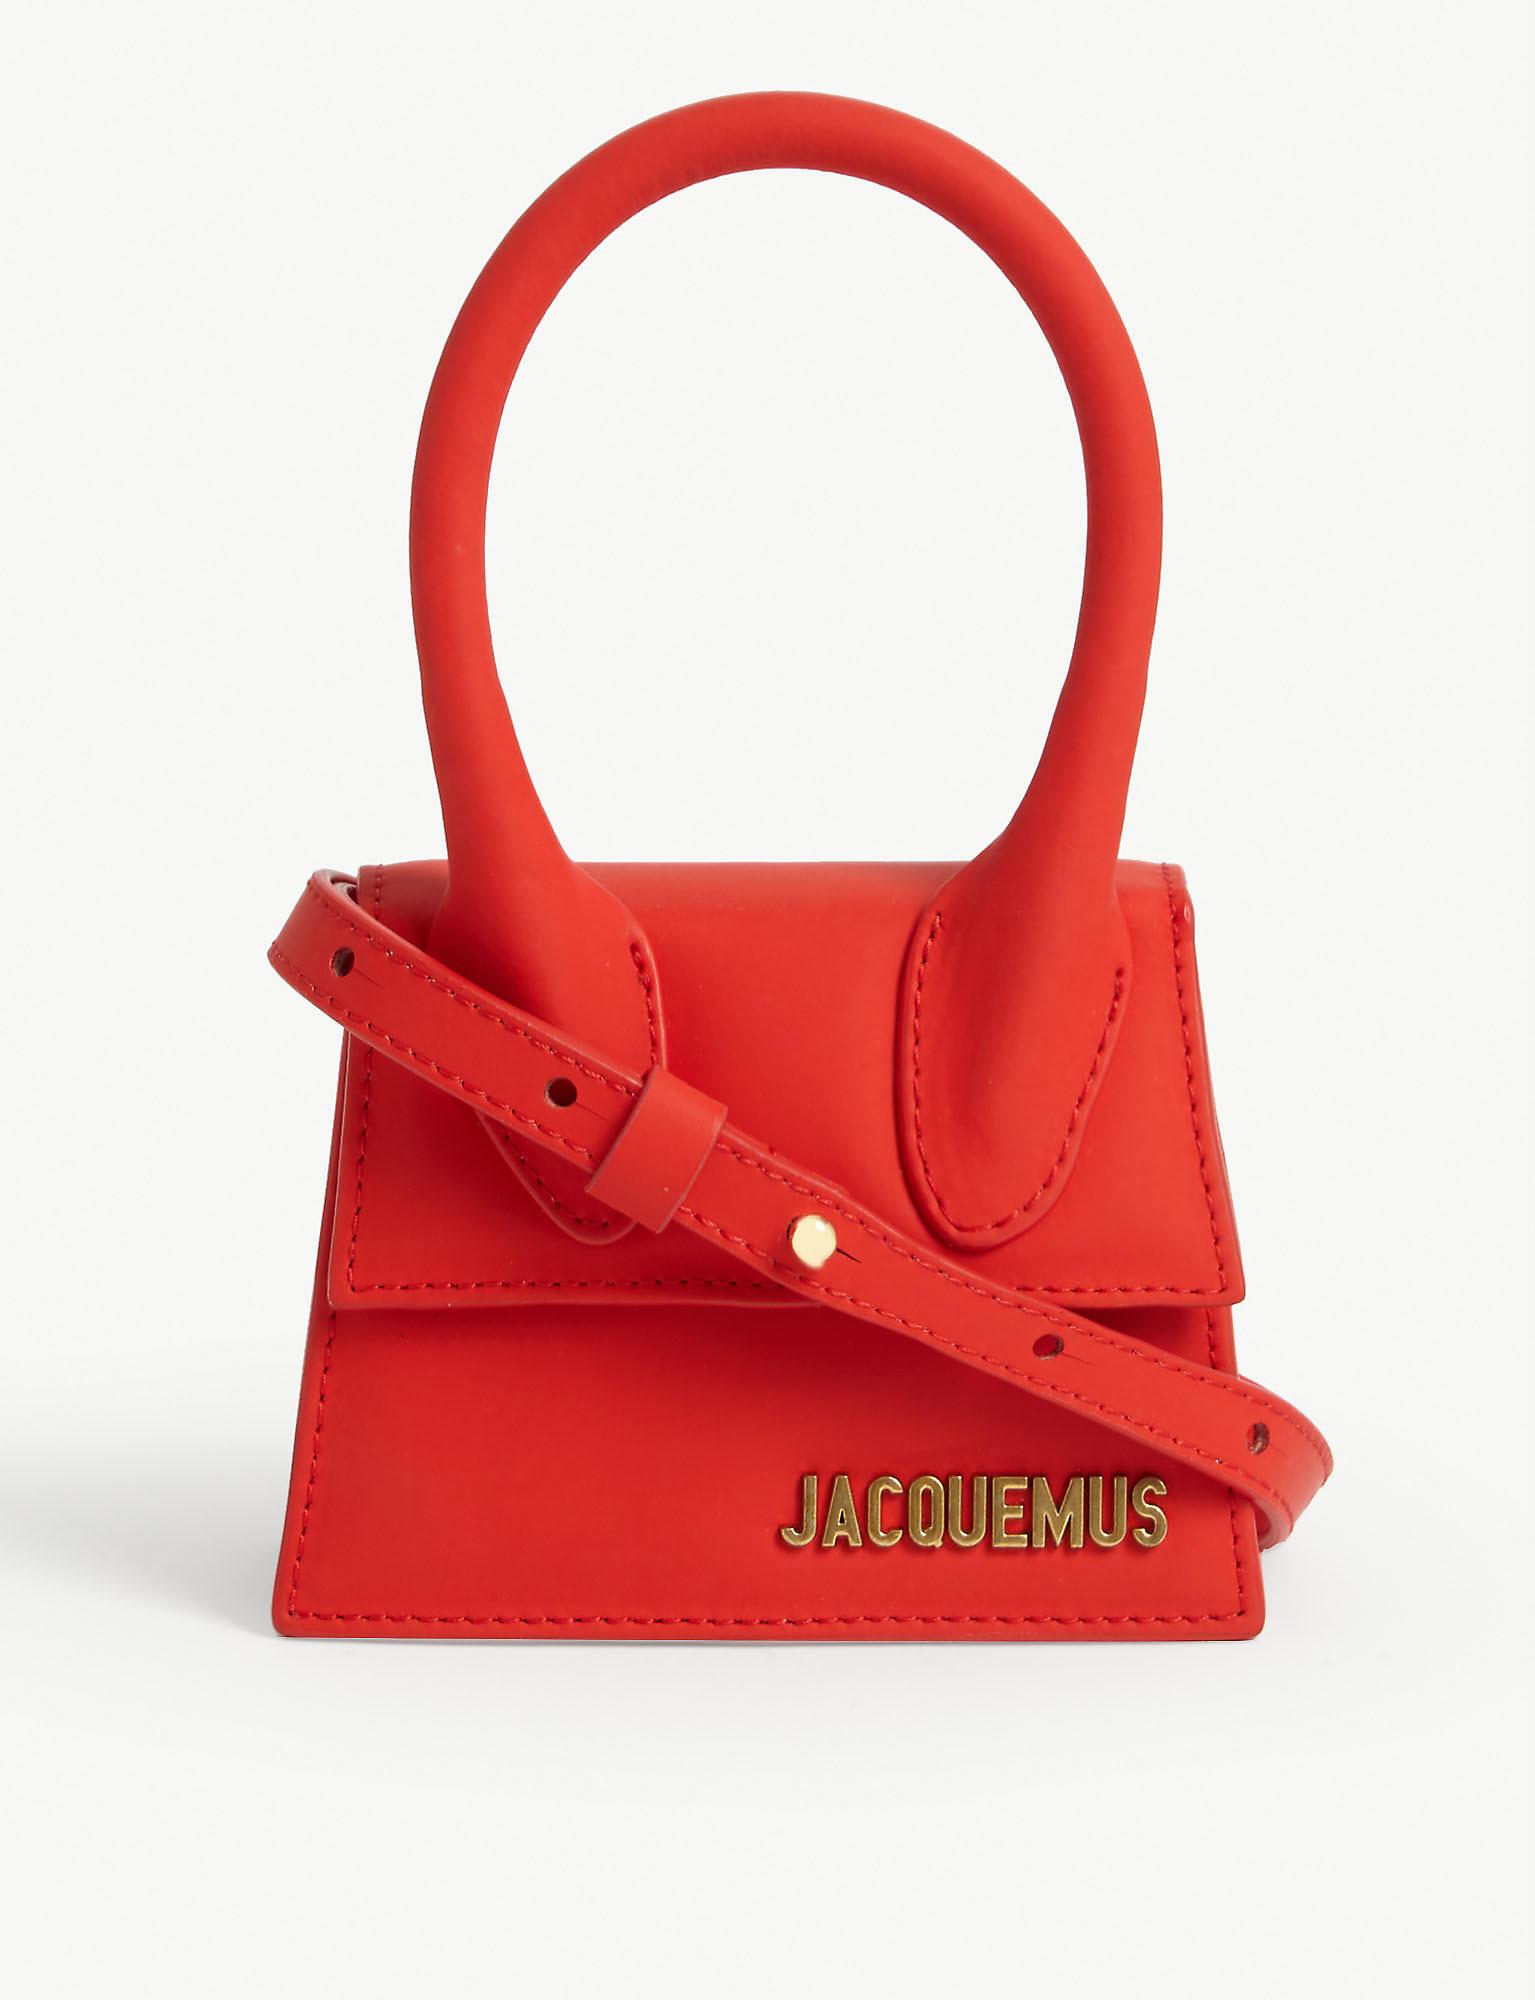 Jacquemus Le Chiquito Mini Leather Tote in Red - Lyst